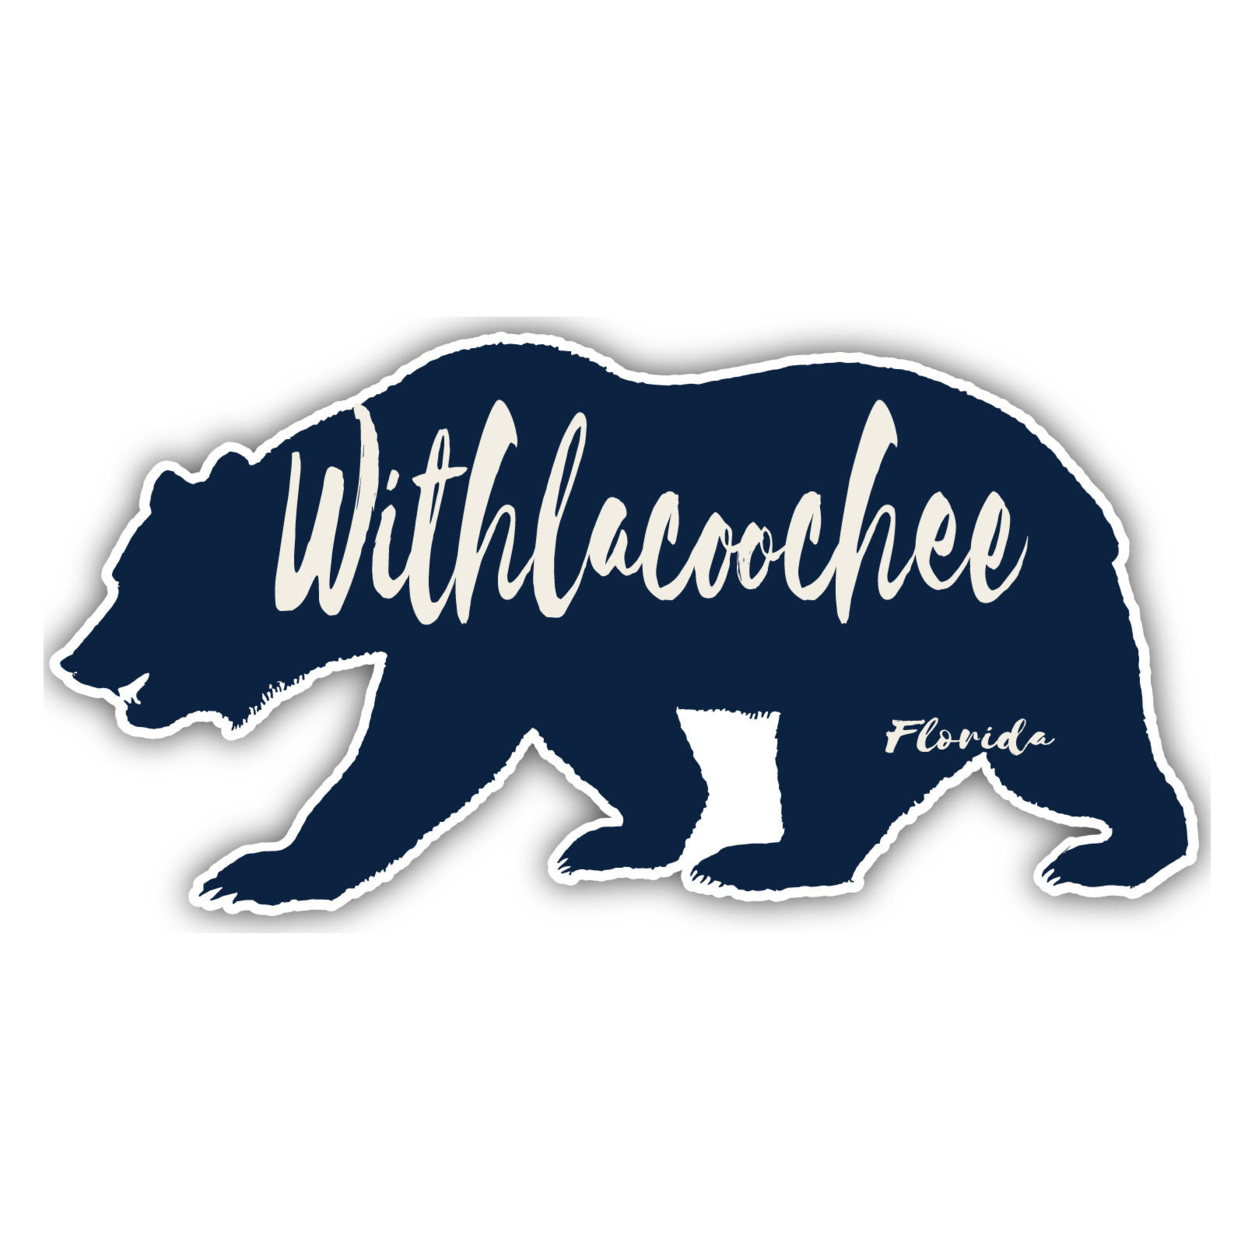 Withlacoochee Florida Souvenir Decorative Stickers (Choose Theme And Size) - Single Unit, 2-Inch, Bear